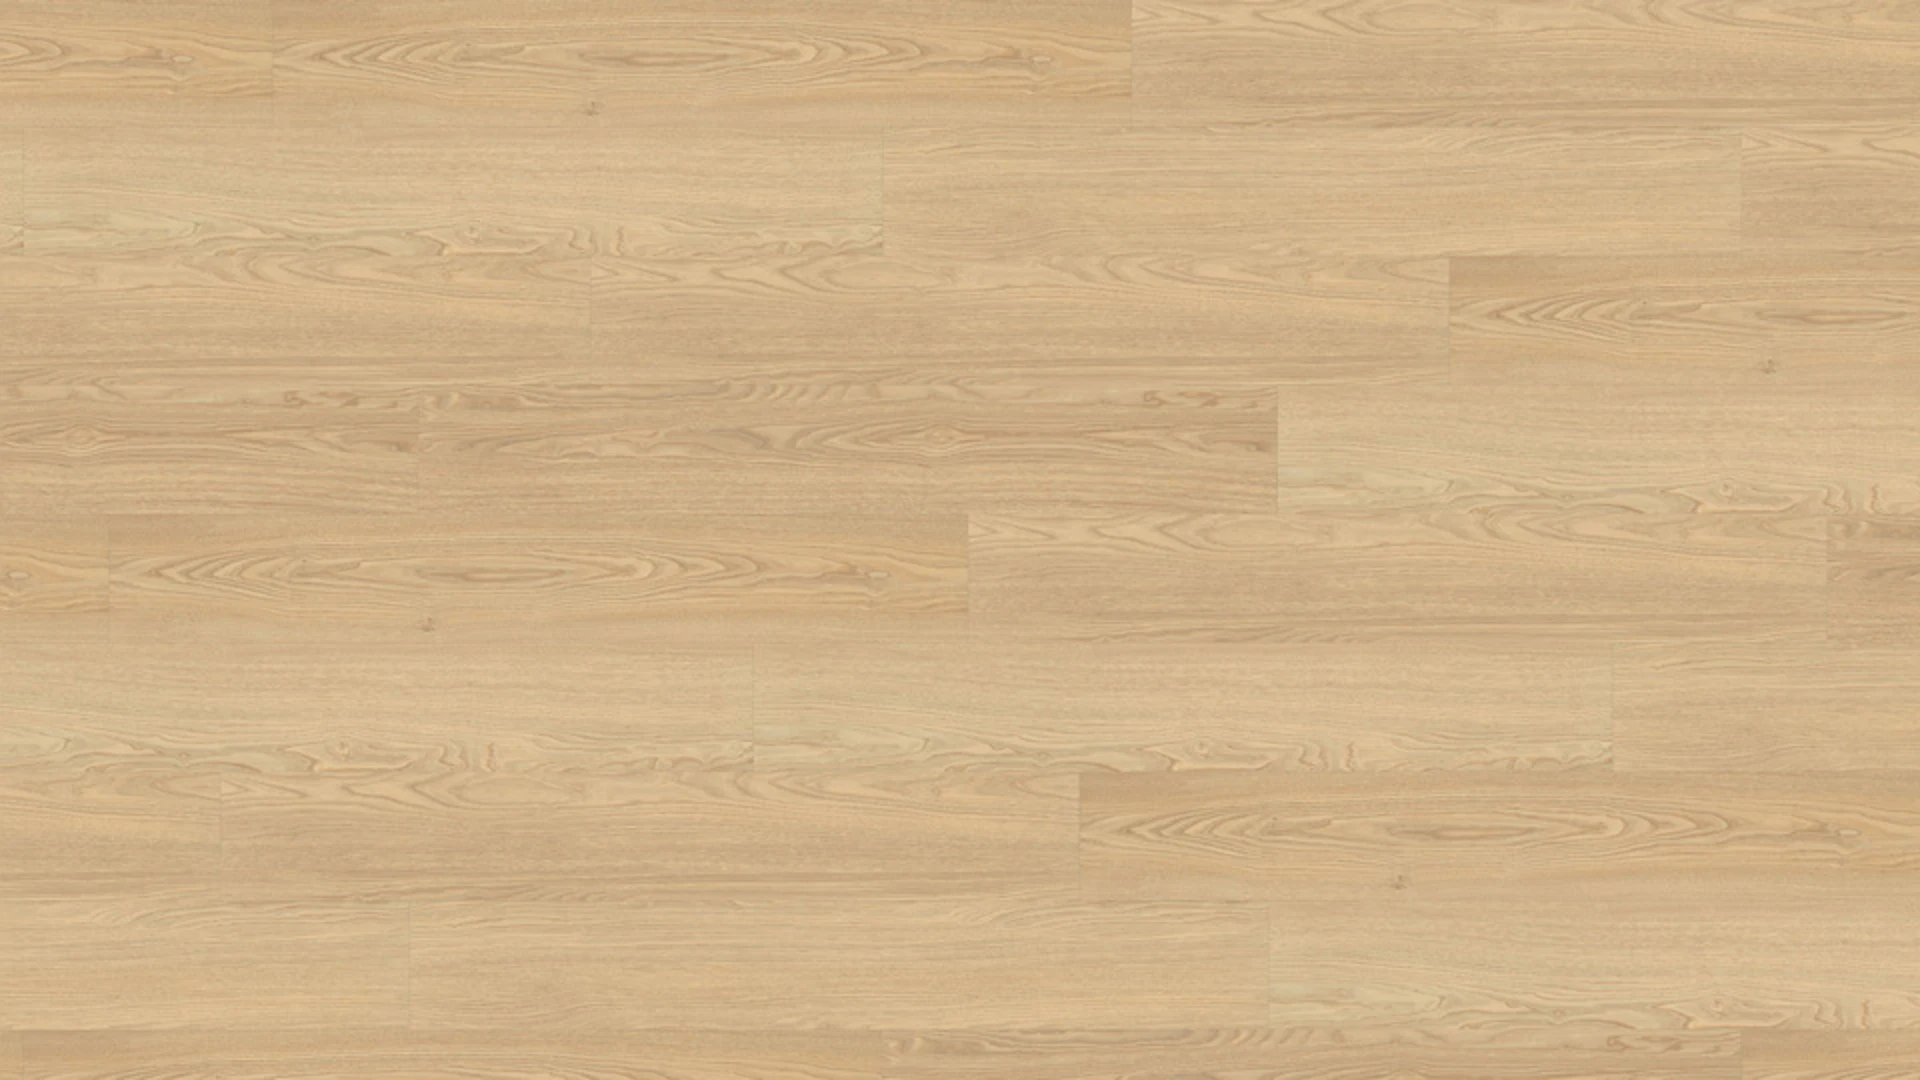 Wineo Klebevinyl - 600 wood Natural Place (DB183W6)